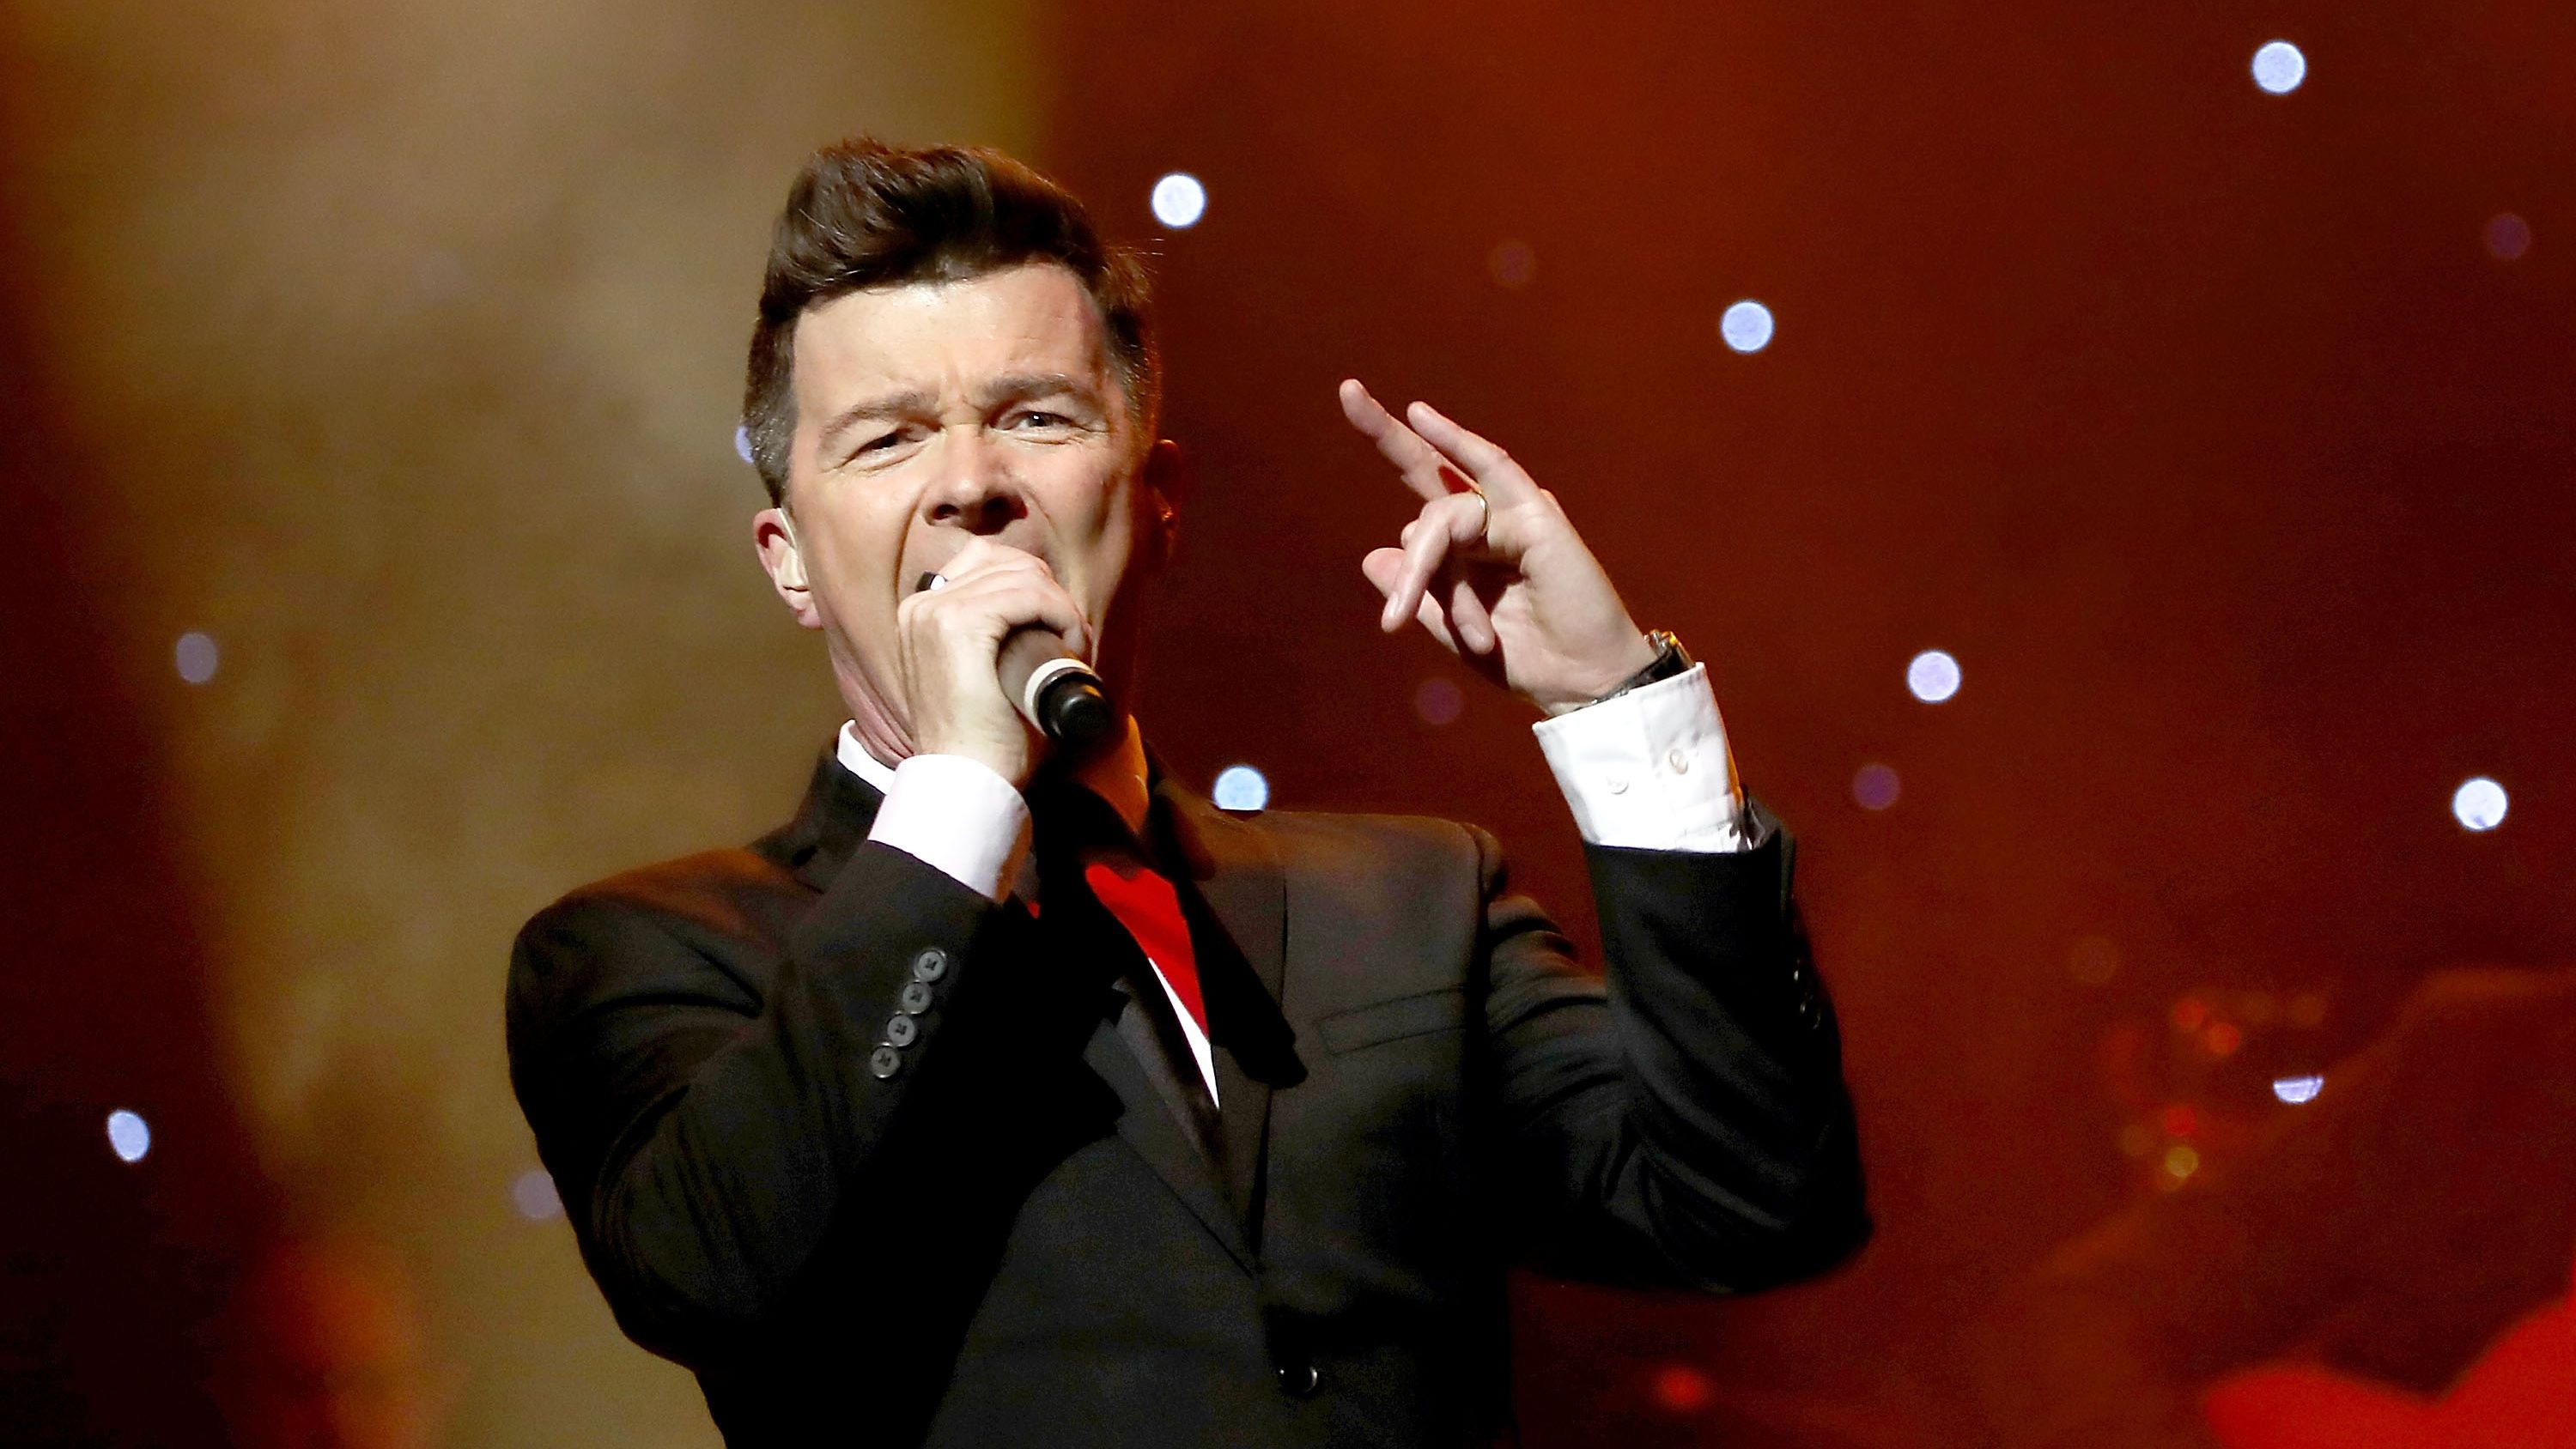 The Magic of Christmas Rick Astley performs 'Pray With Me' at the